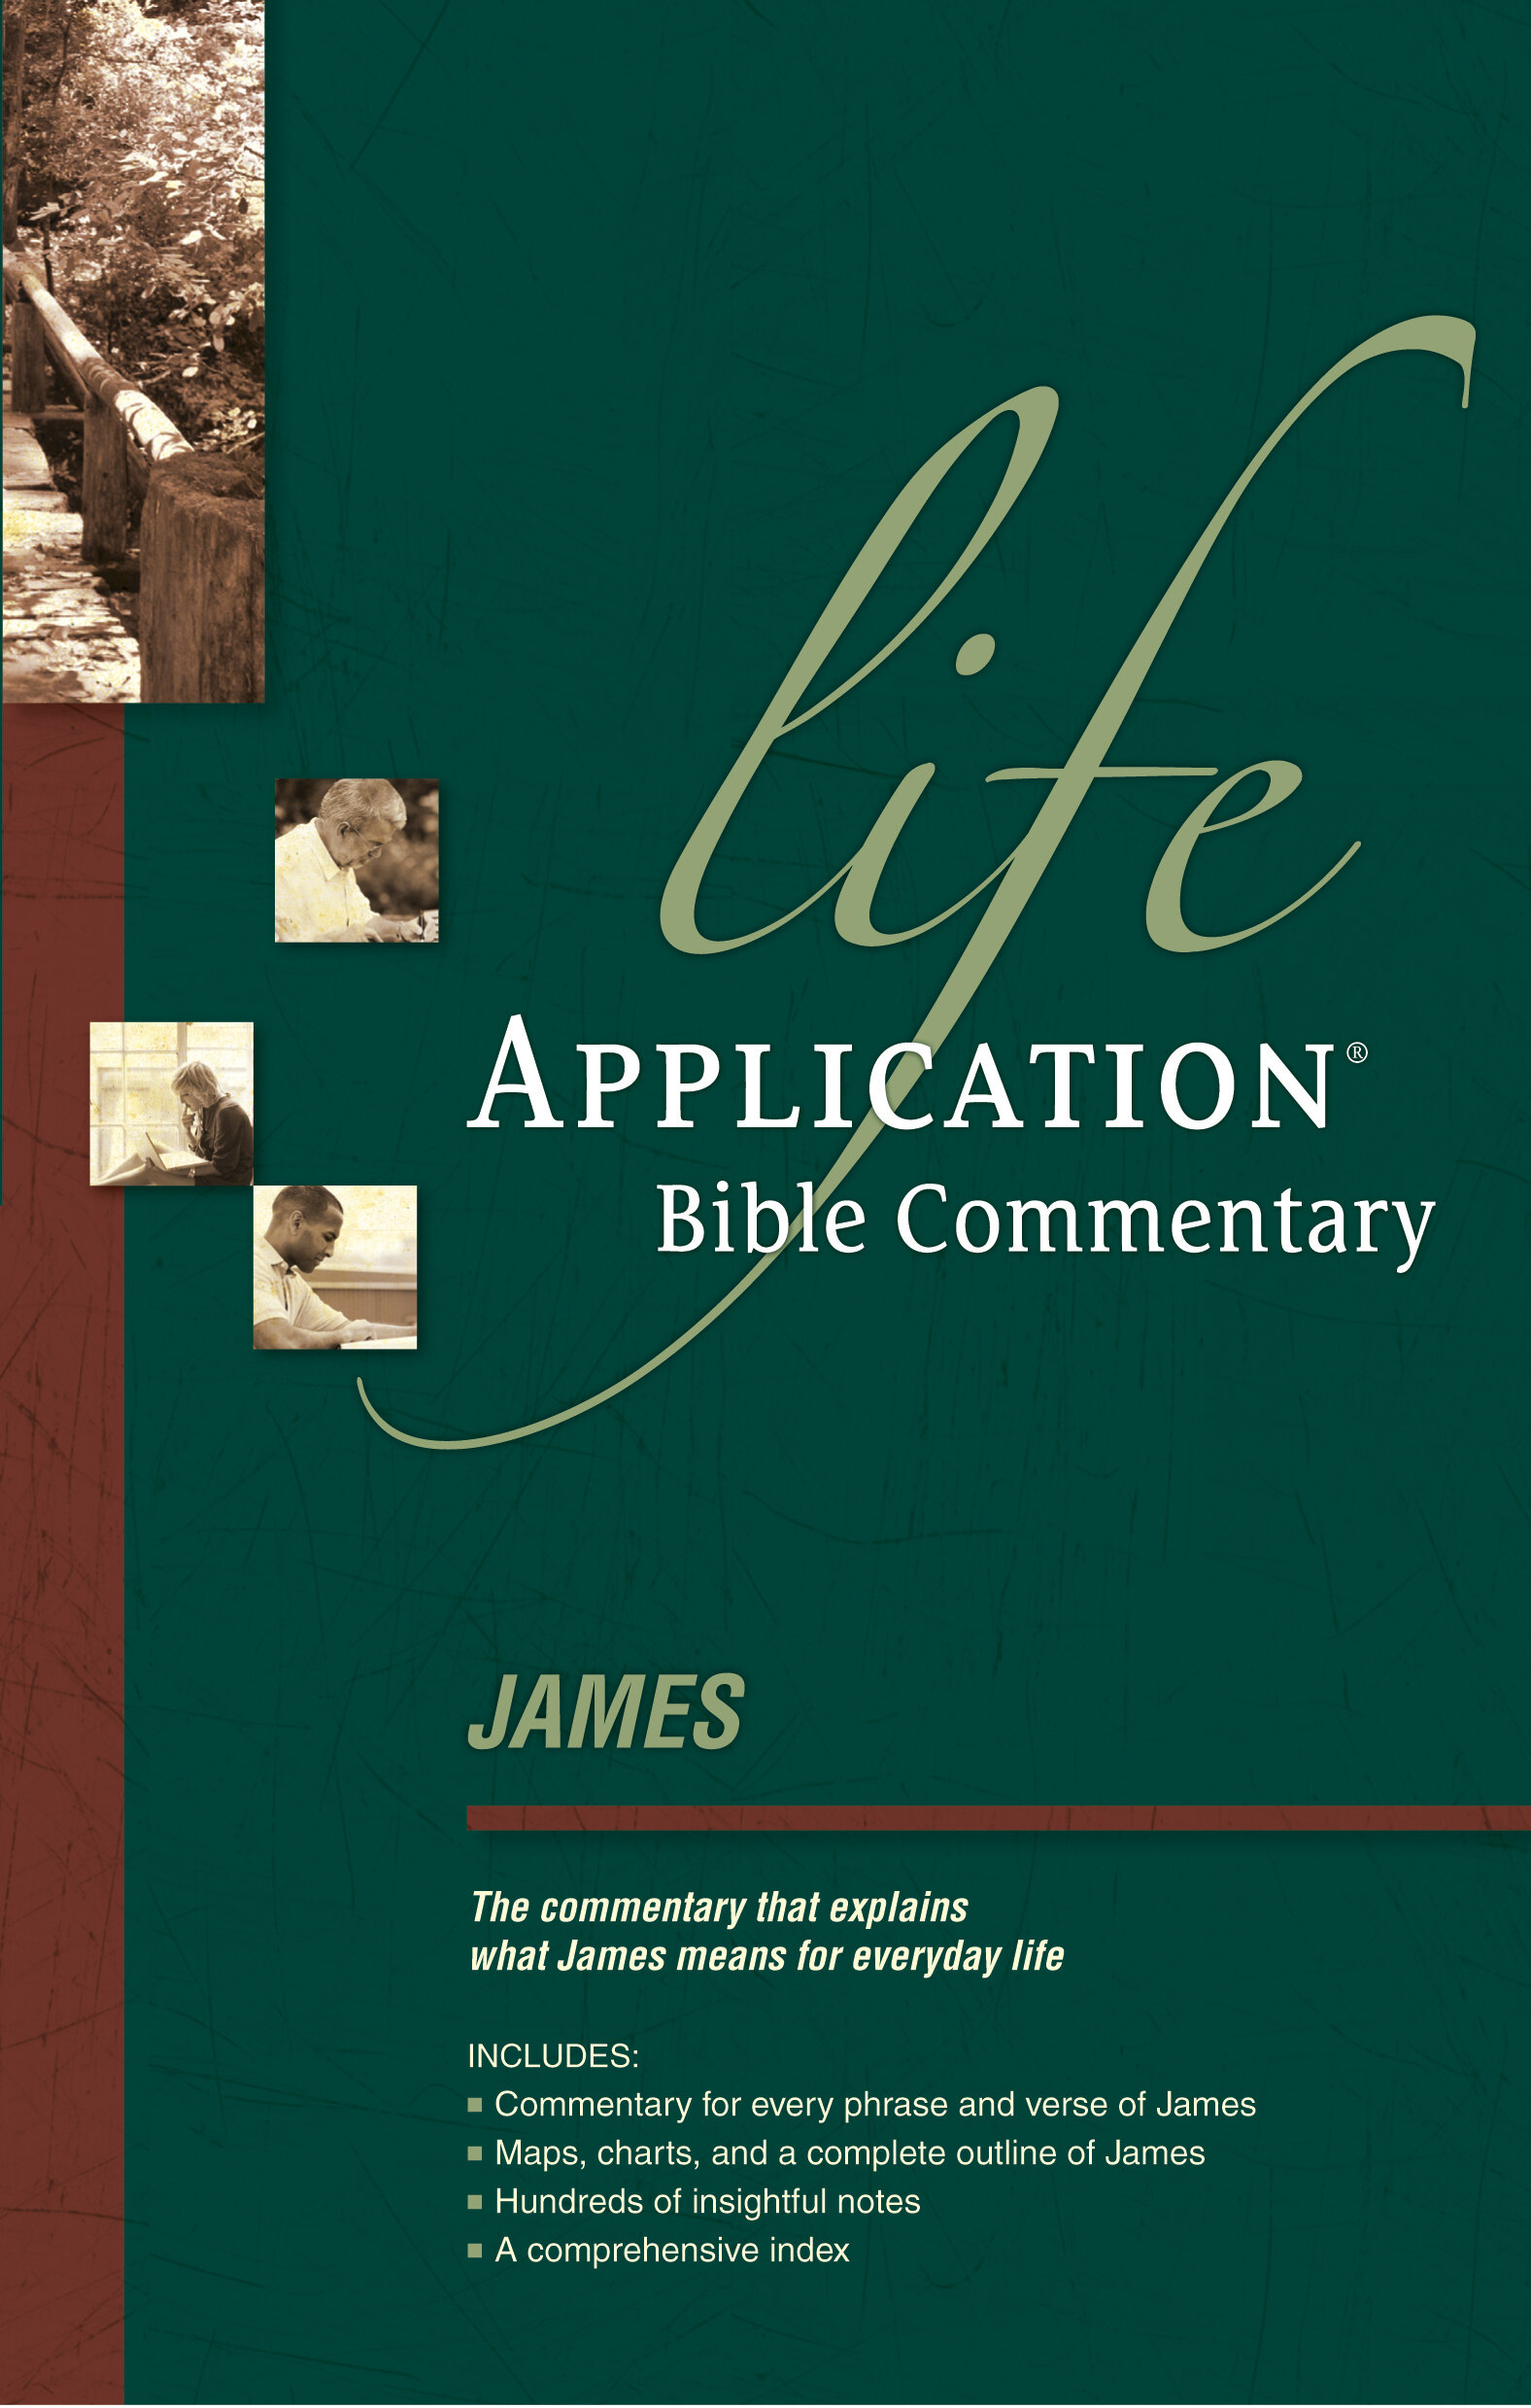 James (Life Application Bible Commentary | LABC)